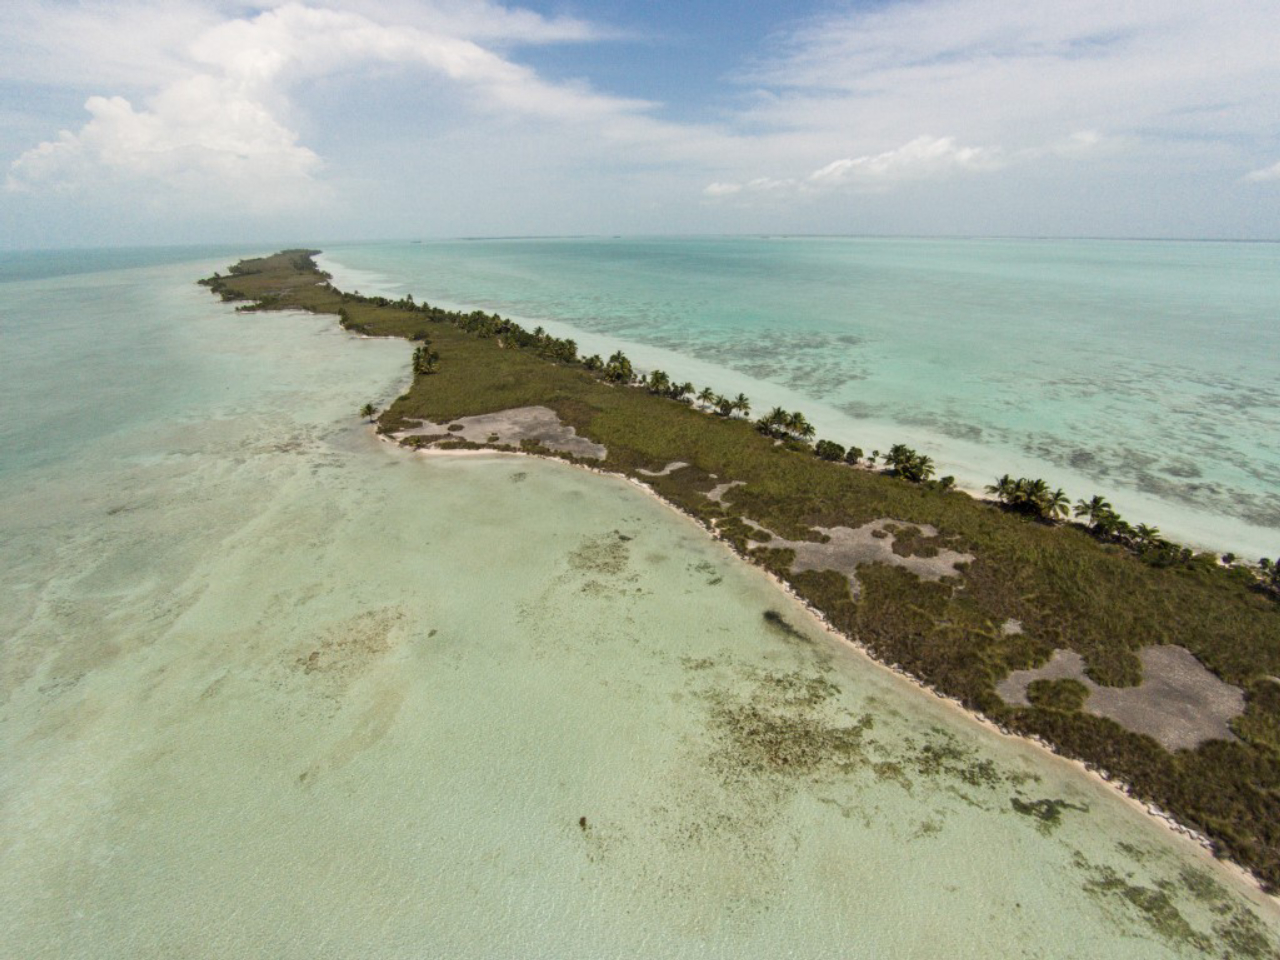 Blackadore Caye, a 104-acre island off the coast of Belize recently purchased by Leonardo DiCaprio, March 27, 2015. DiCaprio, a noted environmental activist, hopes to open an eco-conscious resort here while also reversing the erosion, deforestation and overfishing that Blackadore has endured. (Benedict Kim/The New York Times)